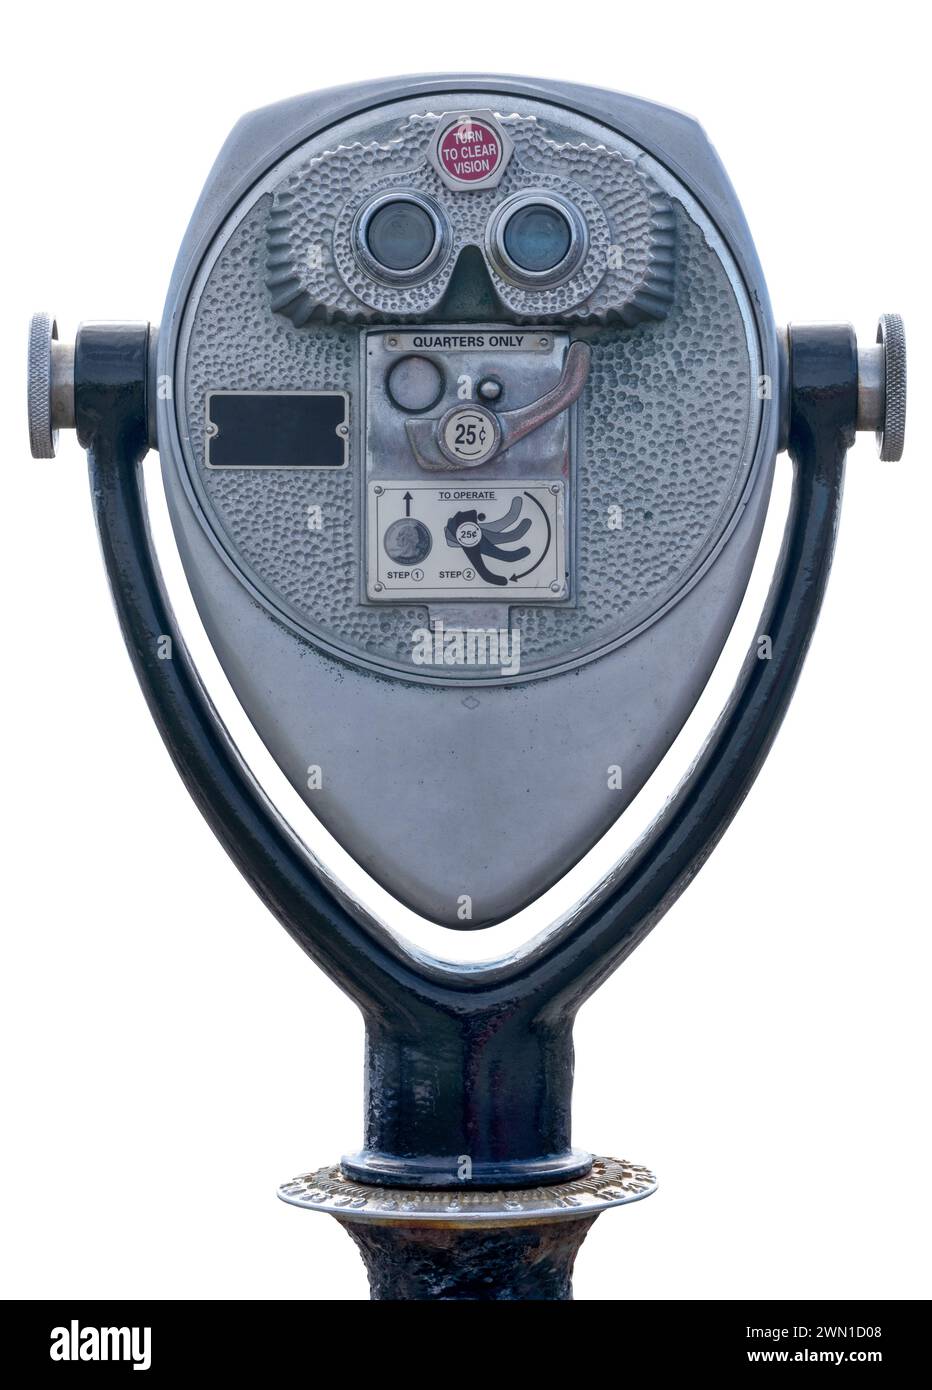 A Retro Coin Operated Tower Viewer (Telescope, Binoculars Or Scenic Viewer), Isolated On A White Background Stock Photo